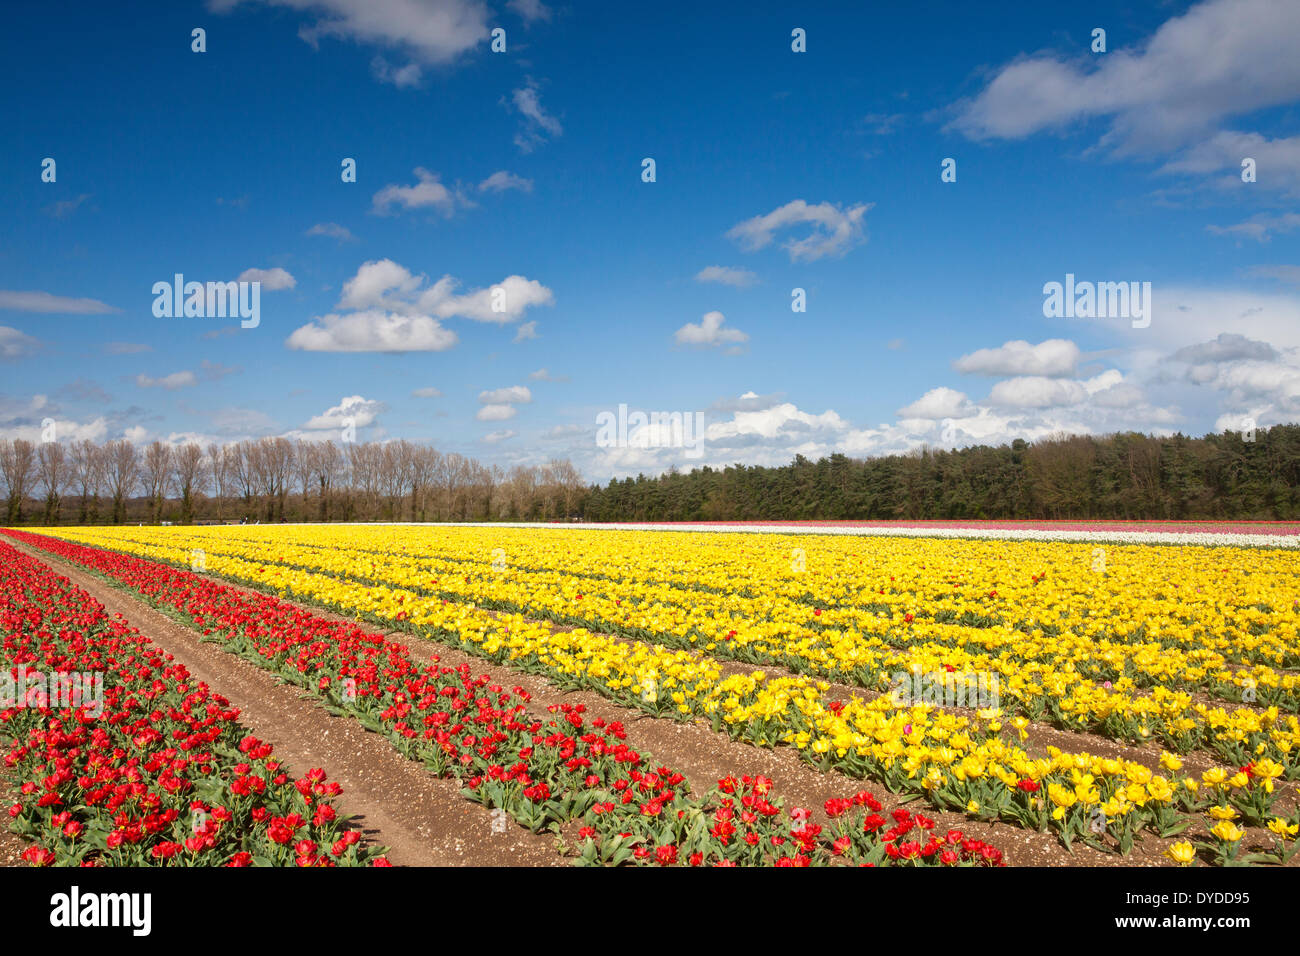 Tulip fields at Narborough near Swaffham in the Norfolk countryside. Stock Photo